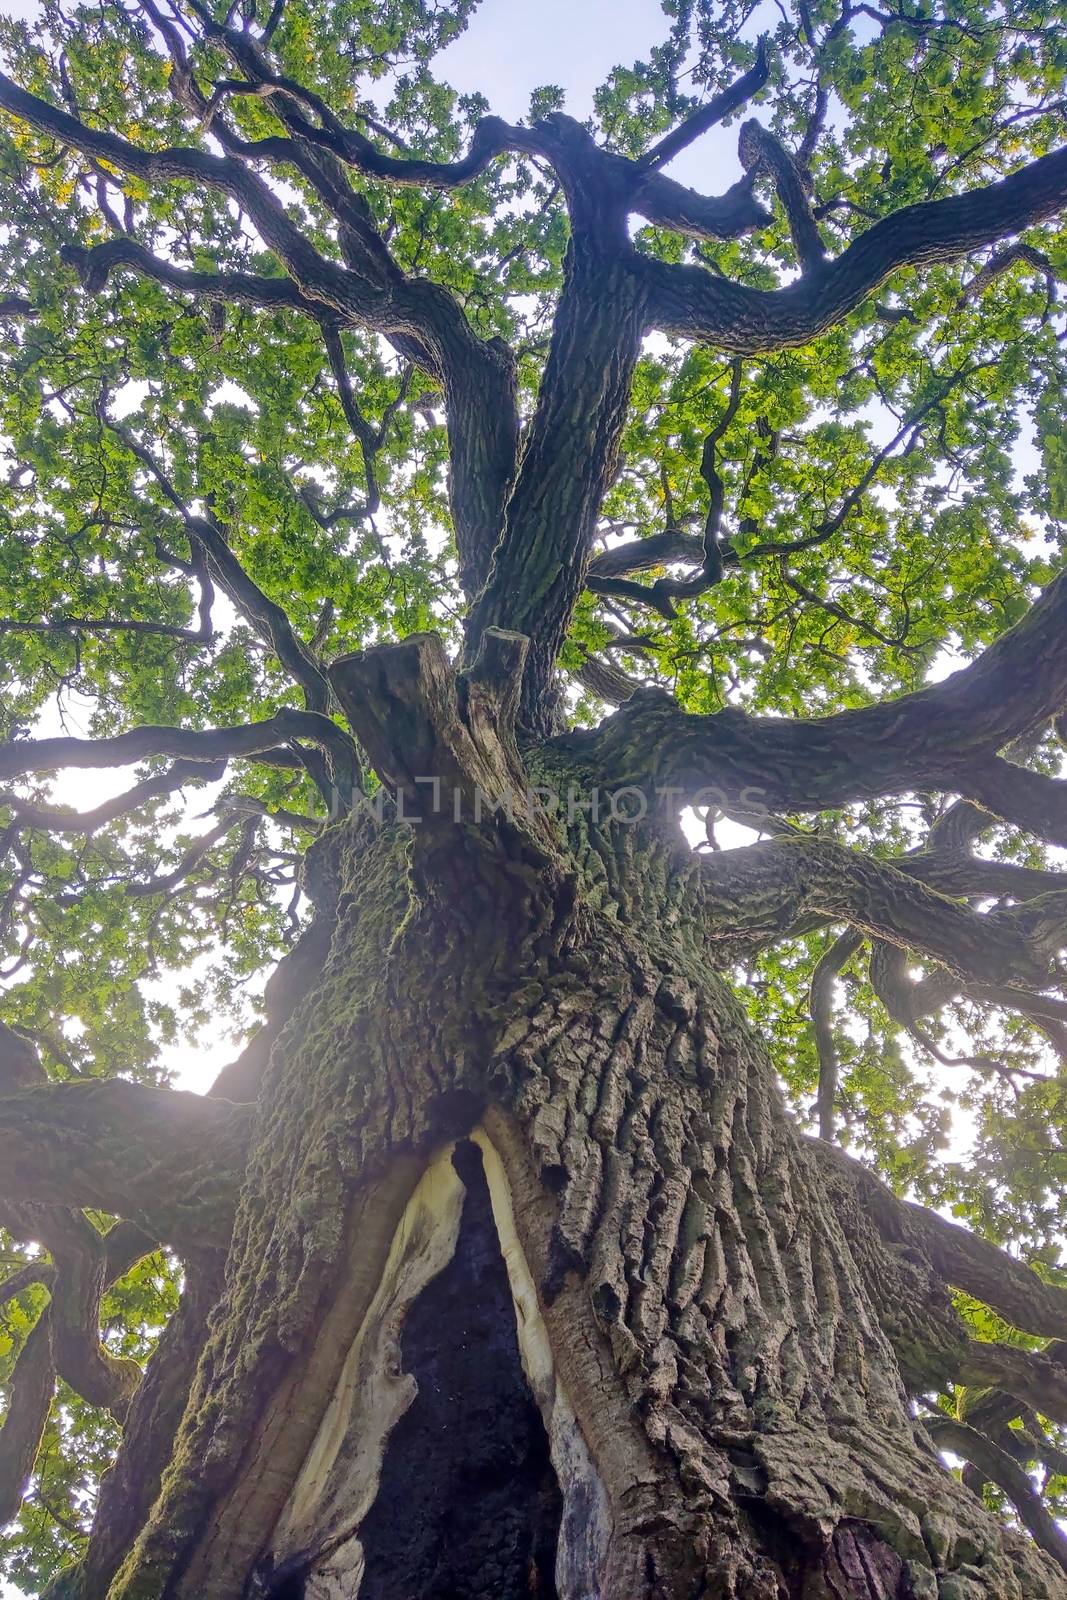 Bottom view of a tall old oak tree